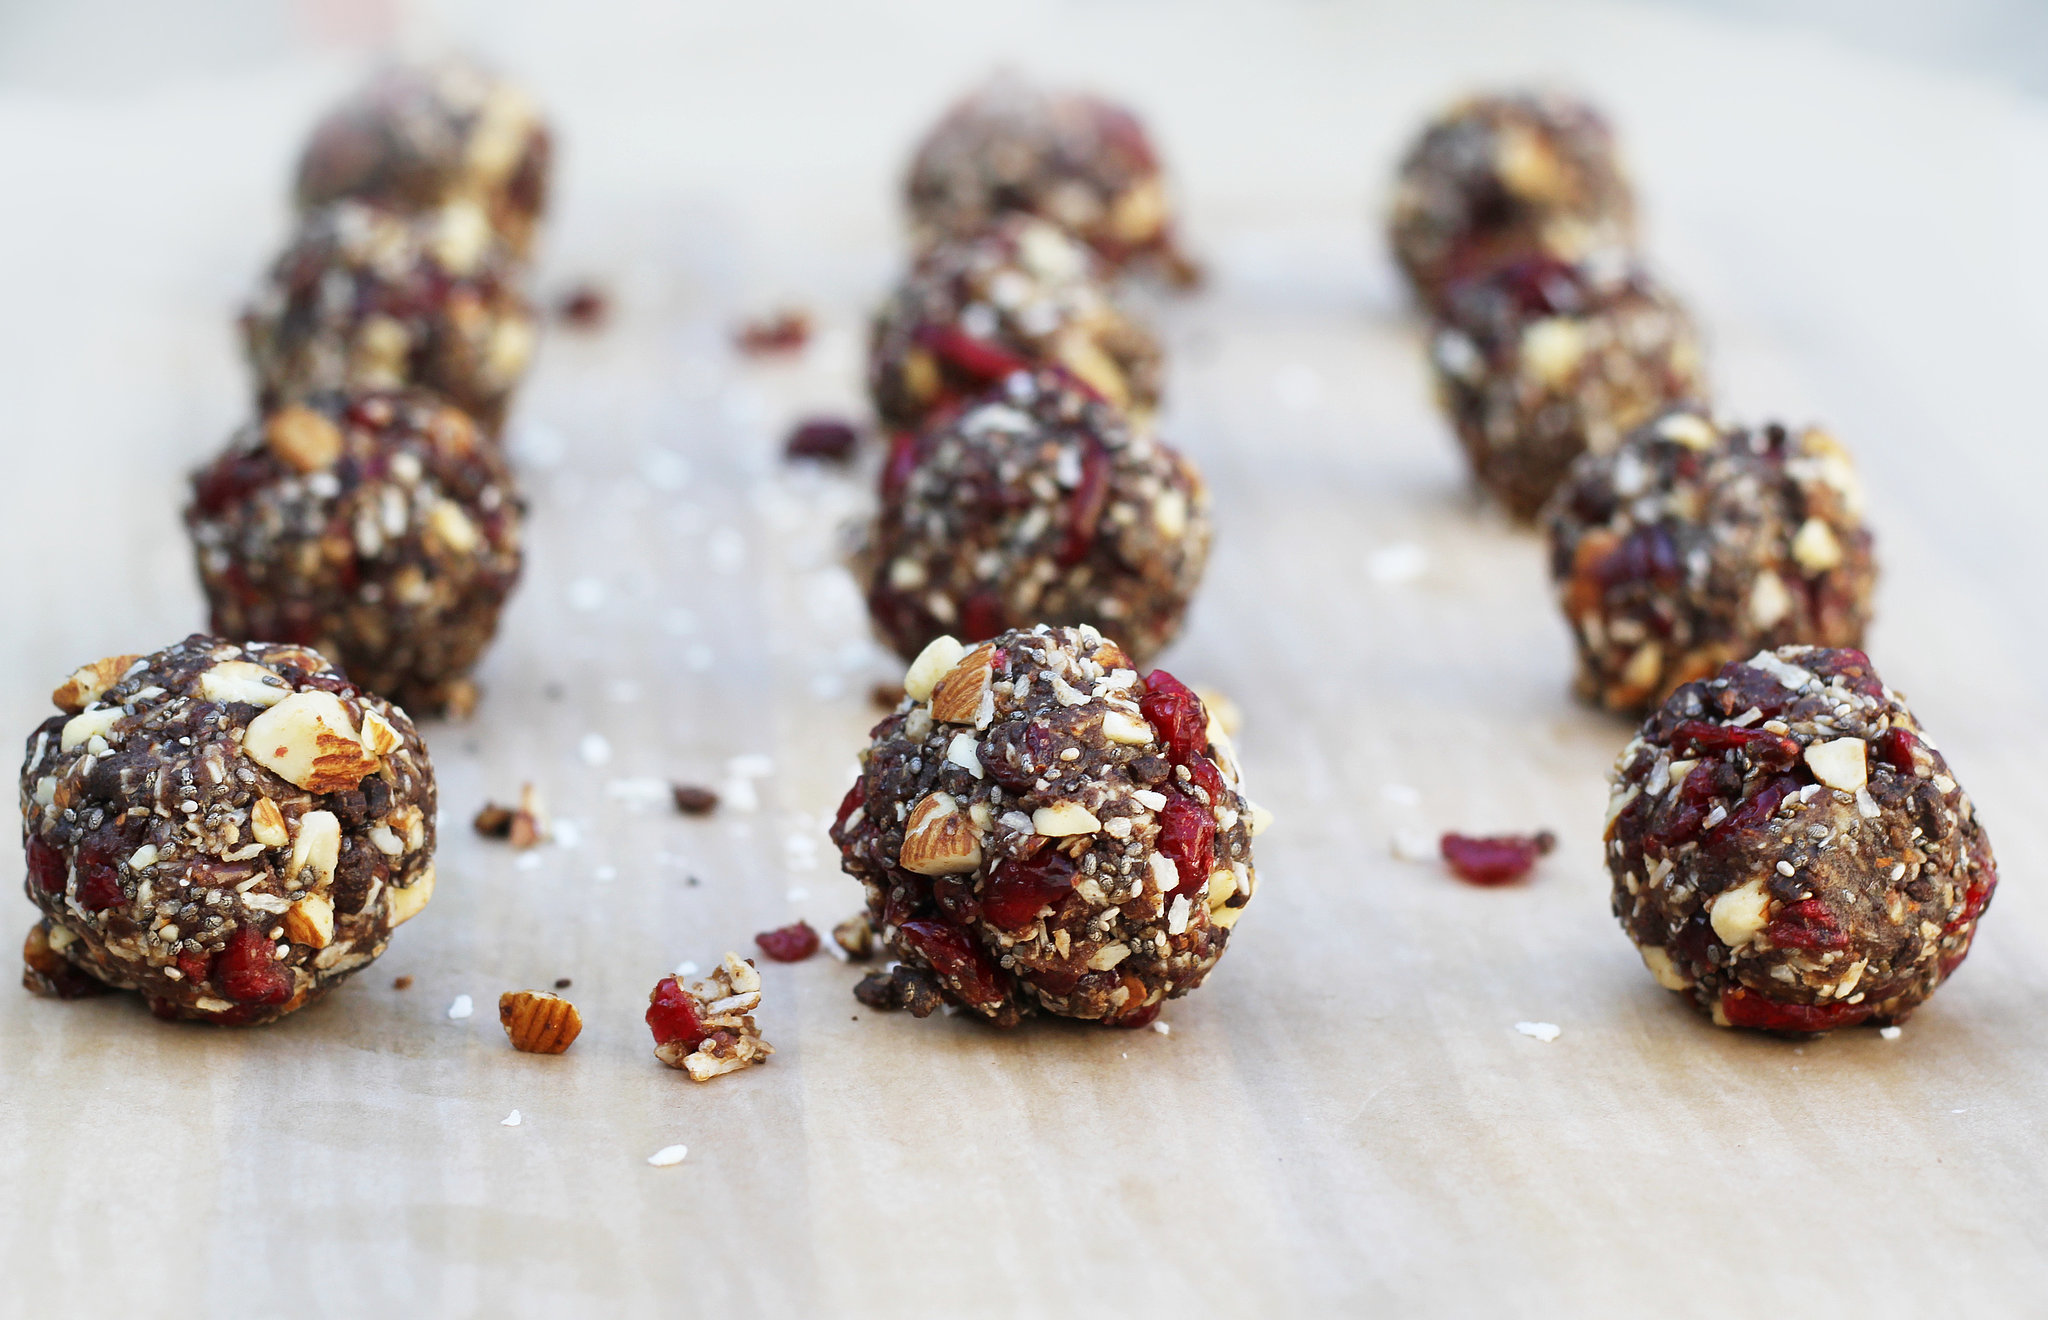 These Vegan Truffles Are the Only Date You’ll Need This Valentine’s Day